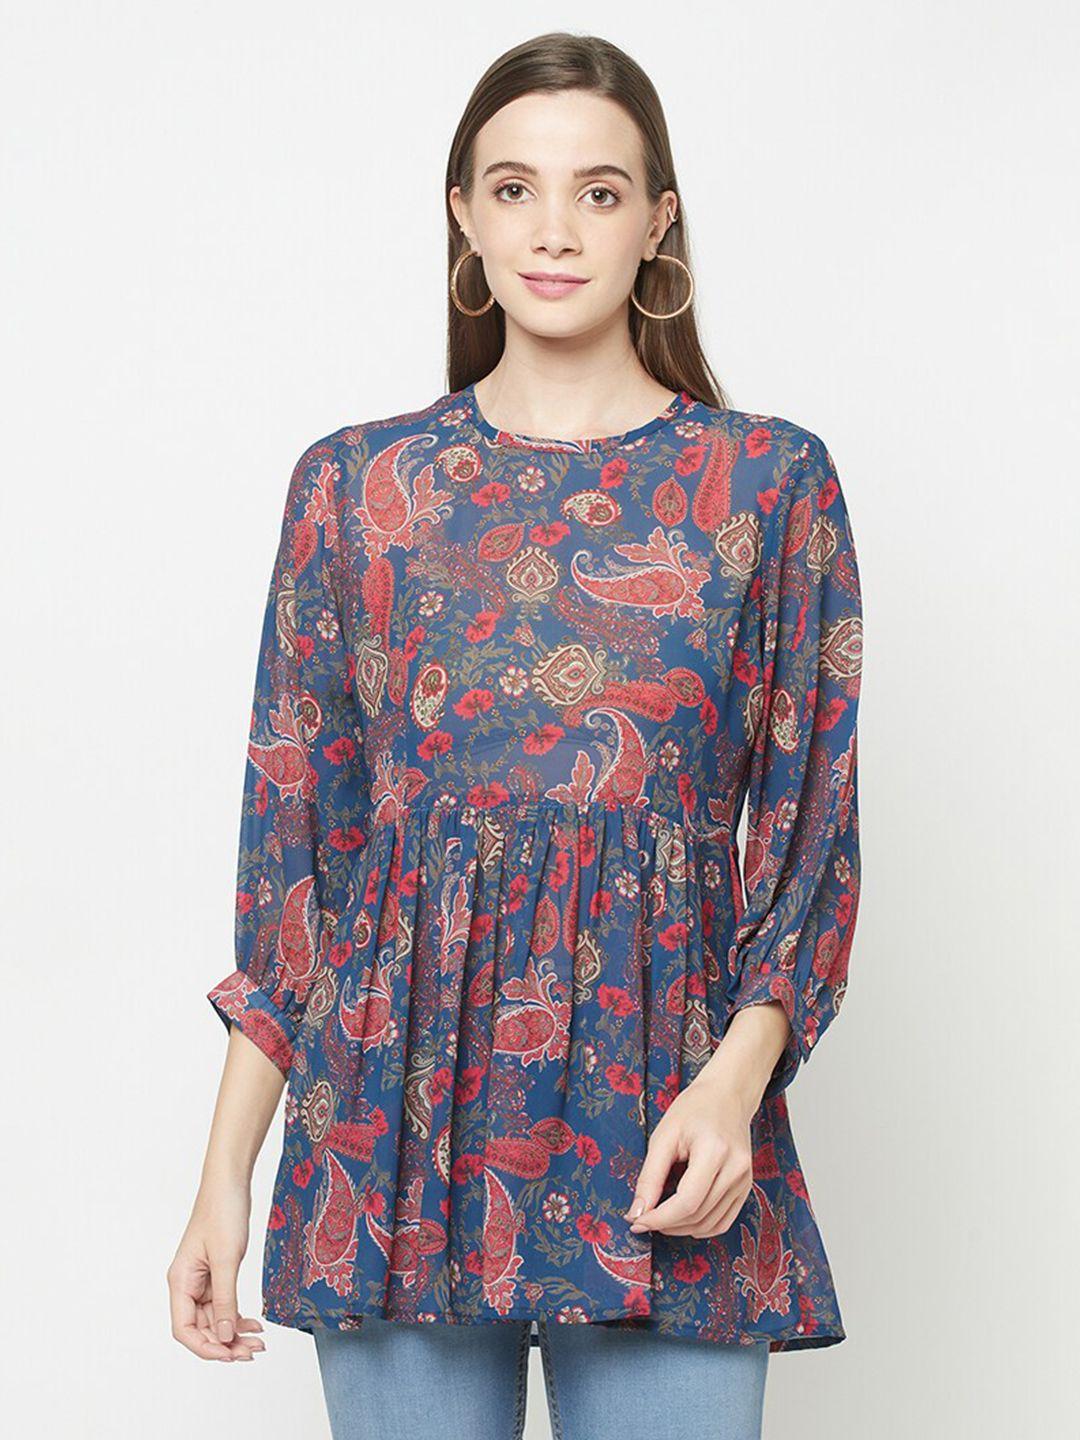 safaa navy blue & red paisley print georgette top